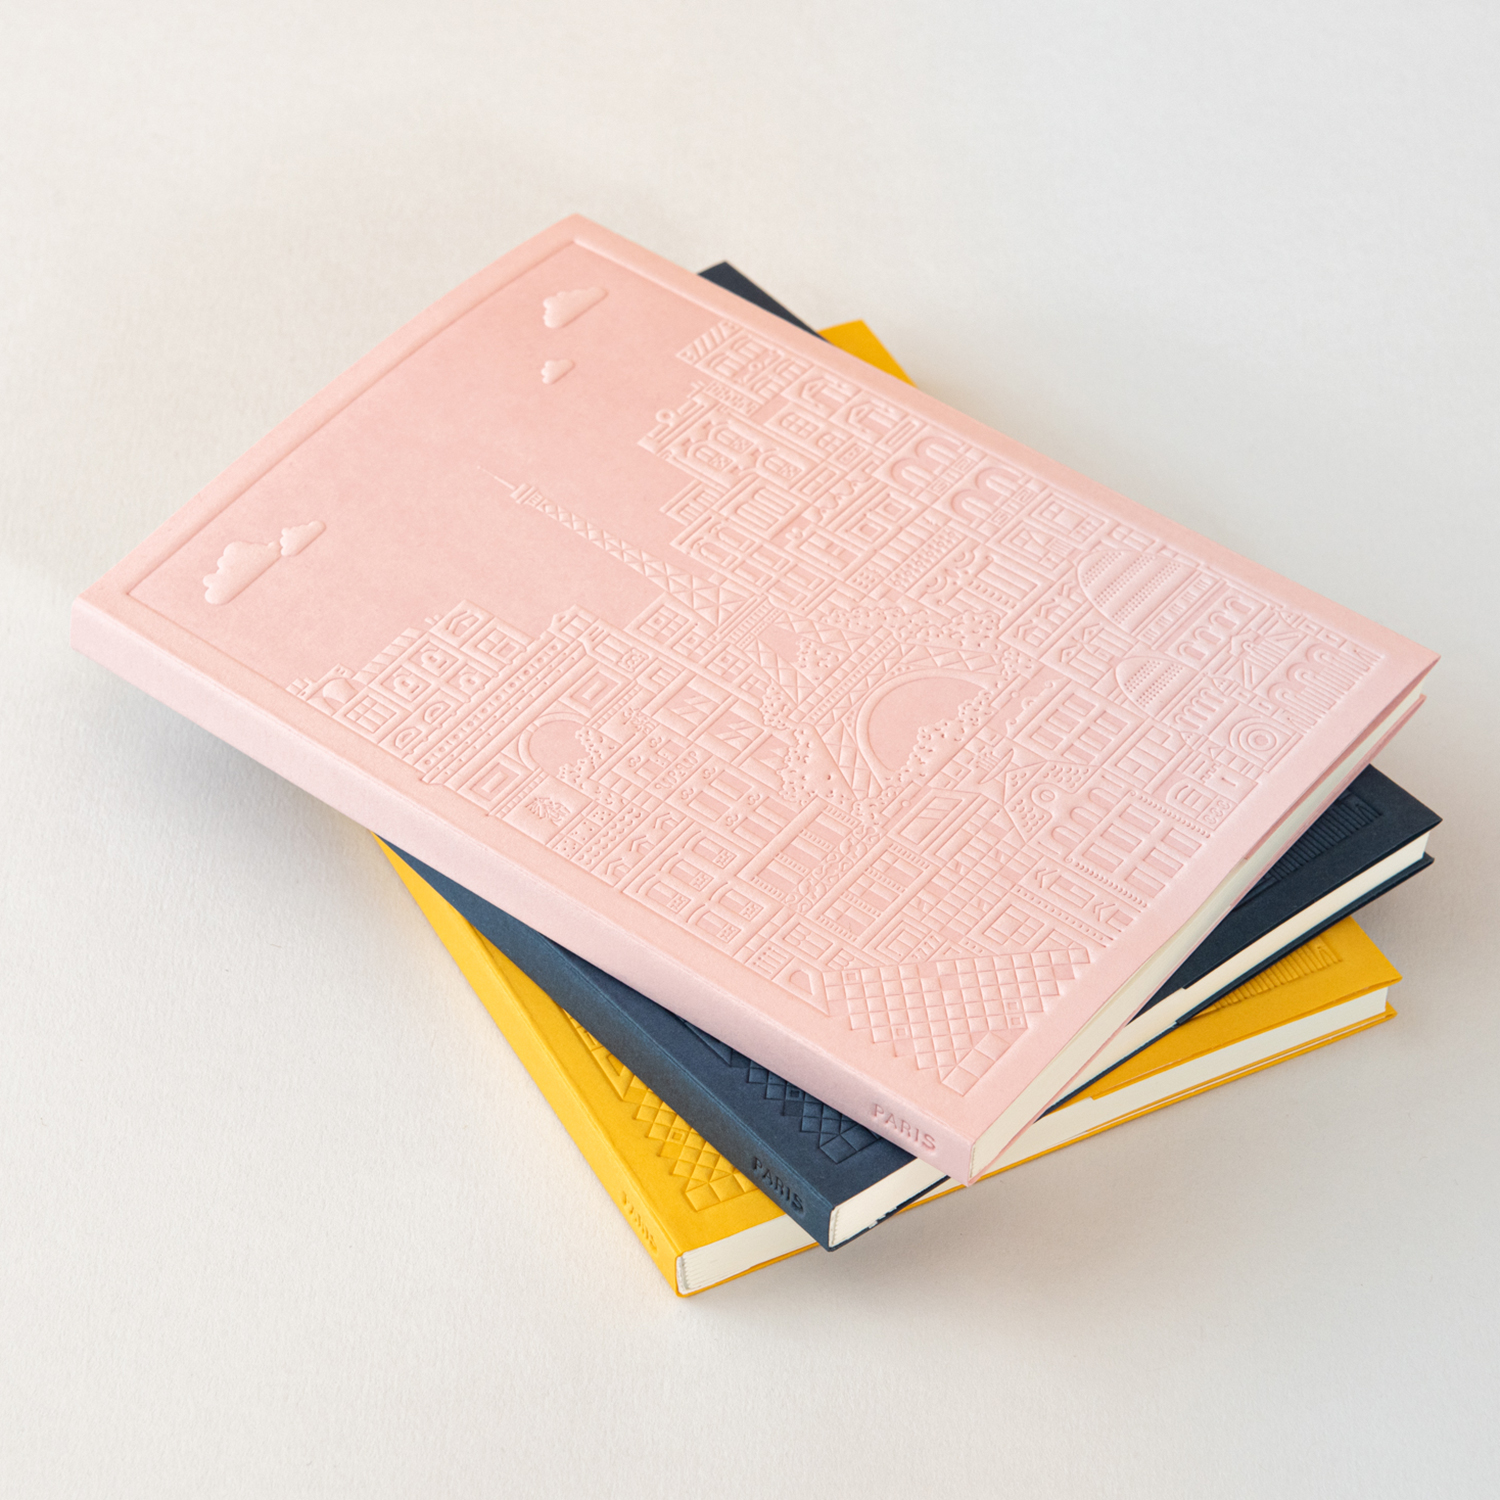 Paris Notebook Stack by The City Works